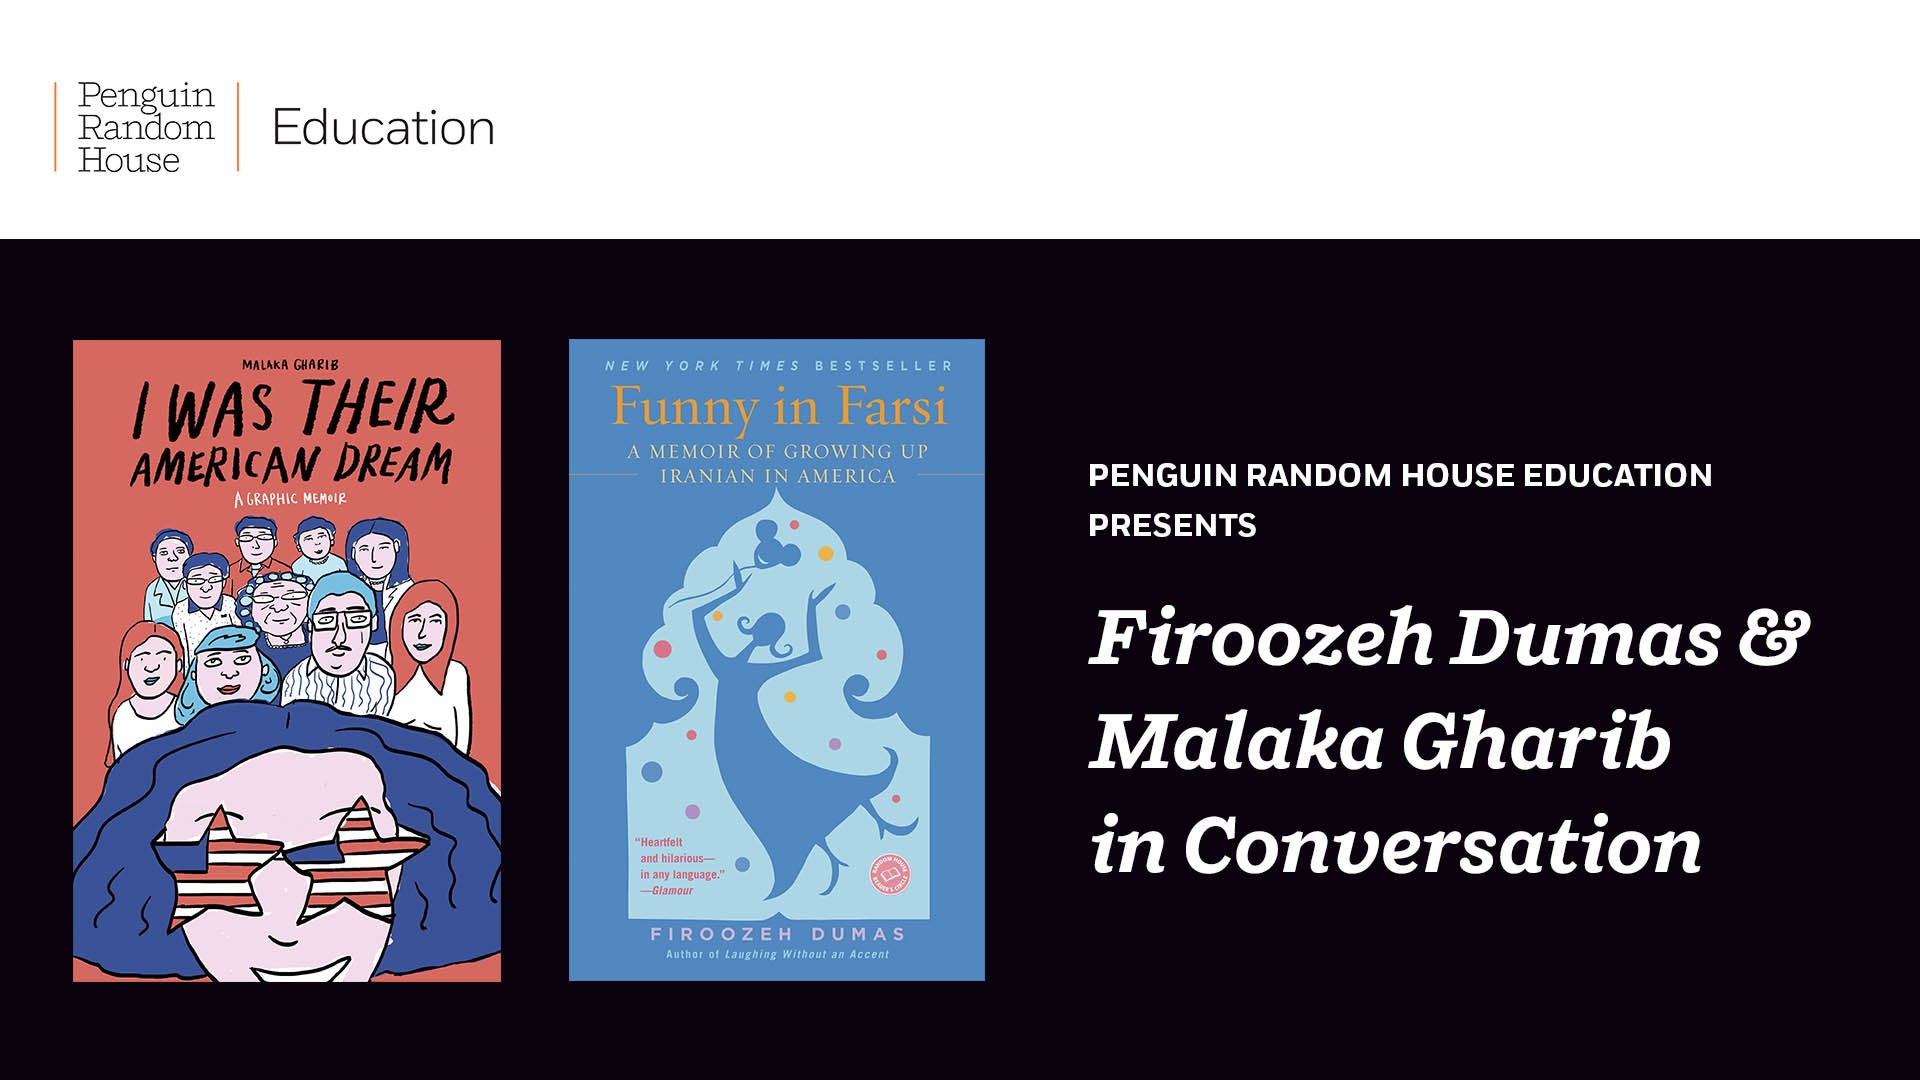 WATCH: Firoozeh Dumas & Malaka Gharib in Conversation on Immigration, Representation & Empowering Students to Tell Their Own Stories